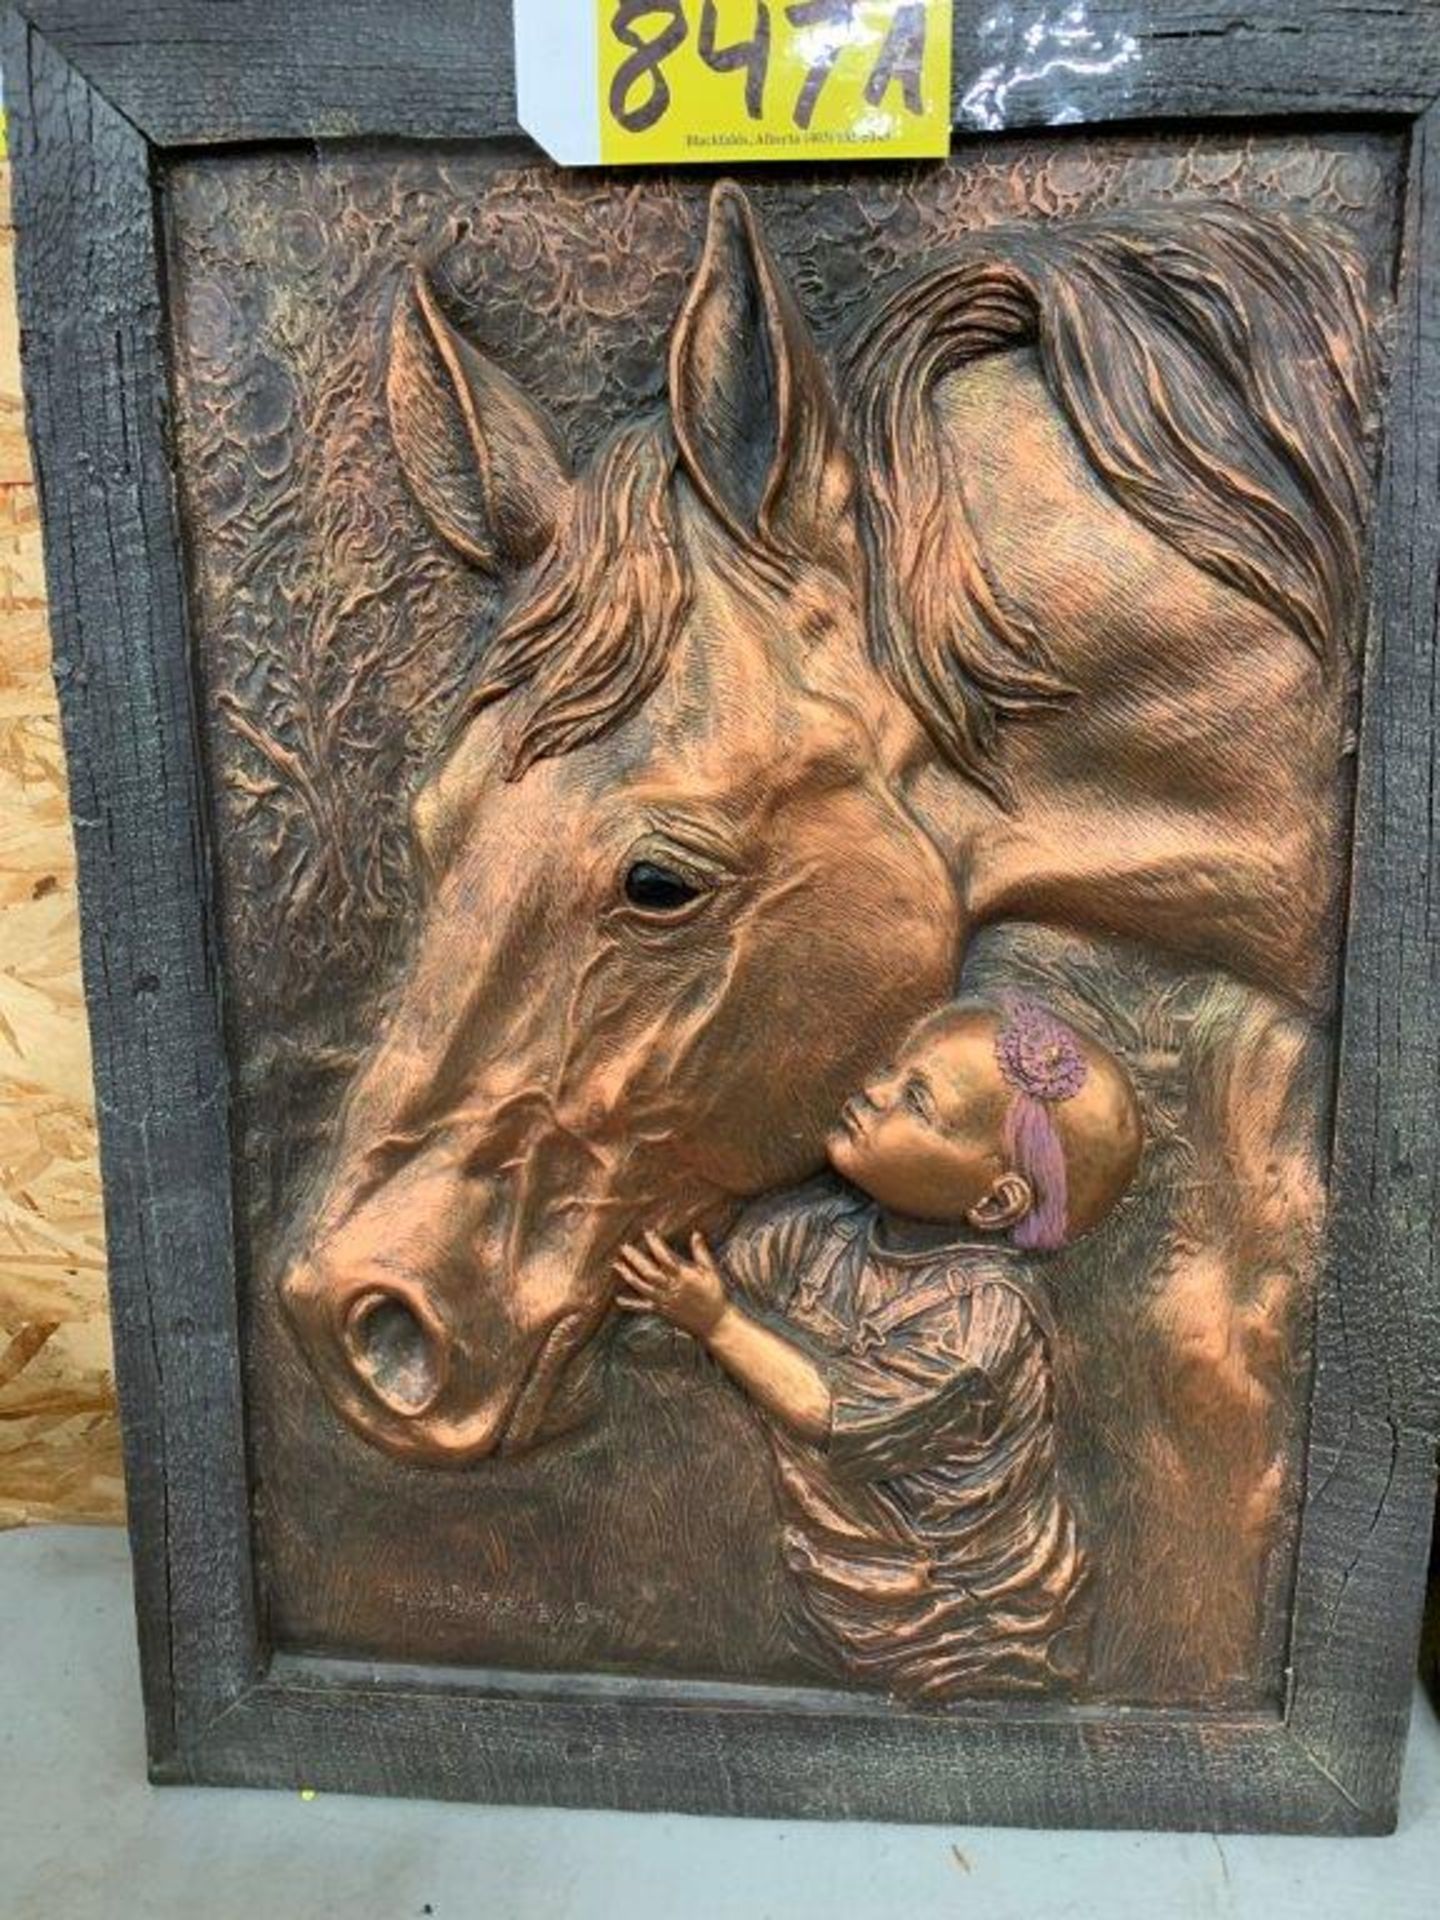 FRAMED 3D PICTURE OF BABY & HORSE